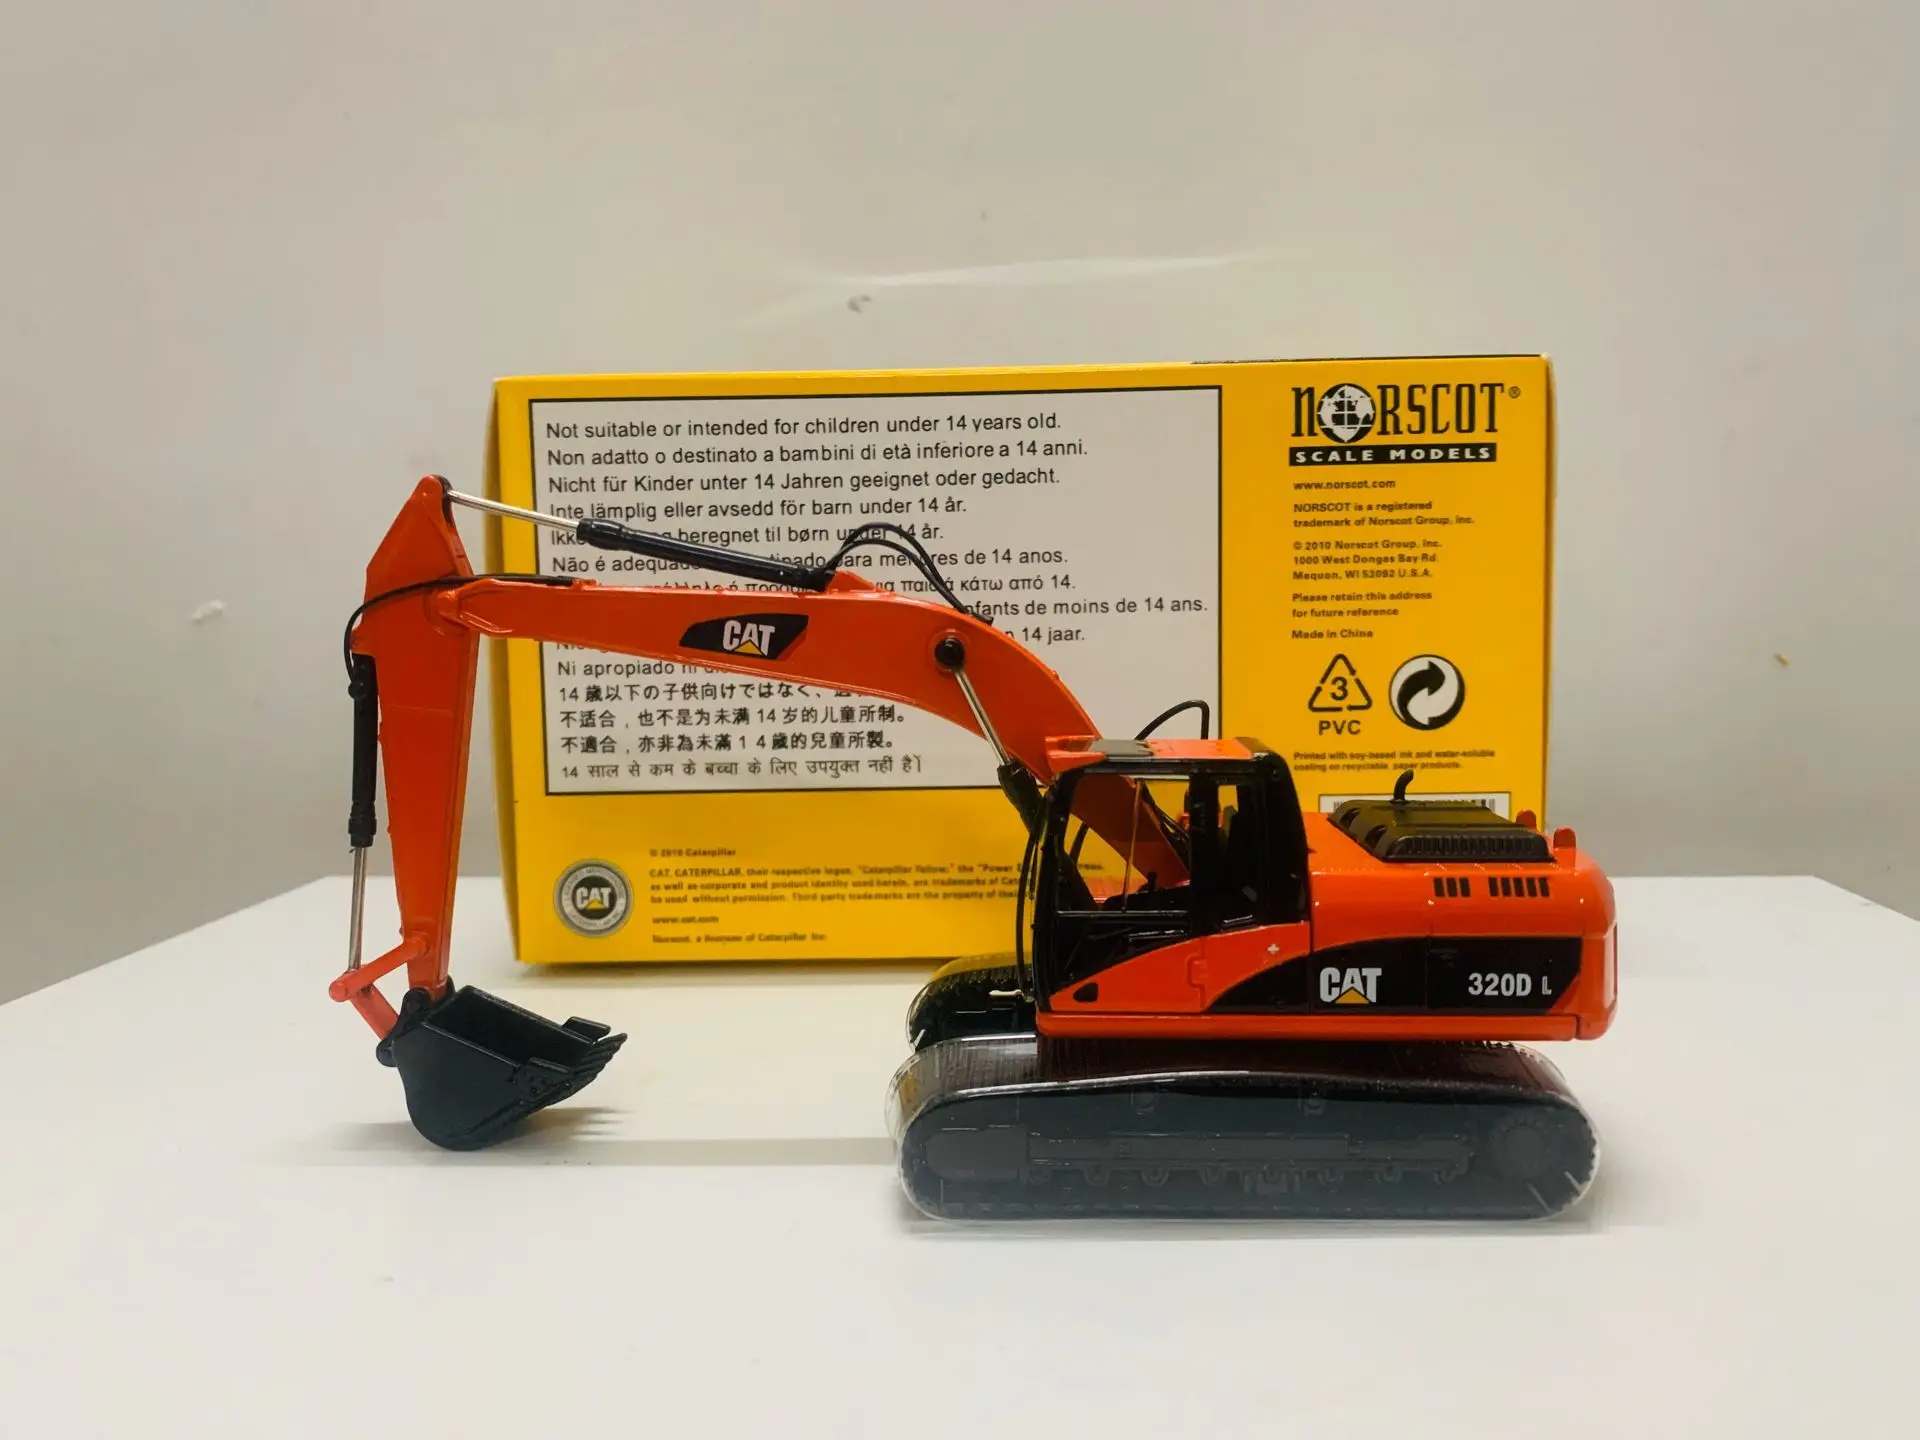 Norscot Cat 320D L Hydraulic Excavator Red 1:50 Scale Die-Cast Model 55214 New